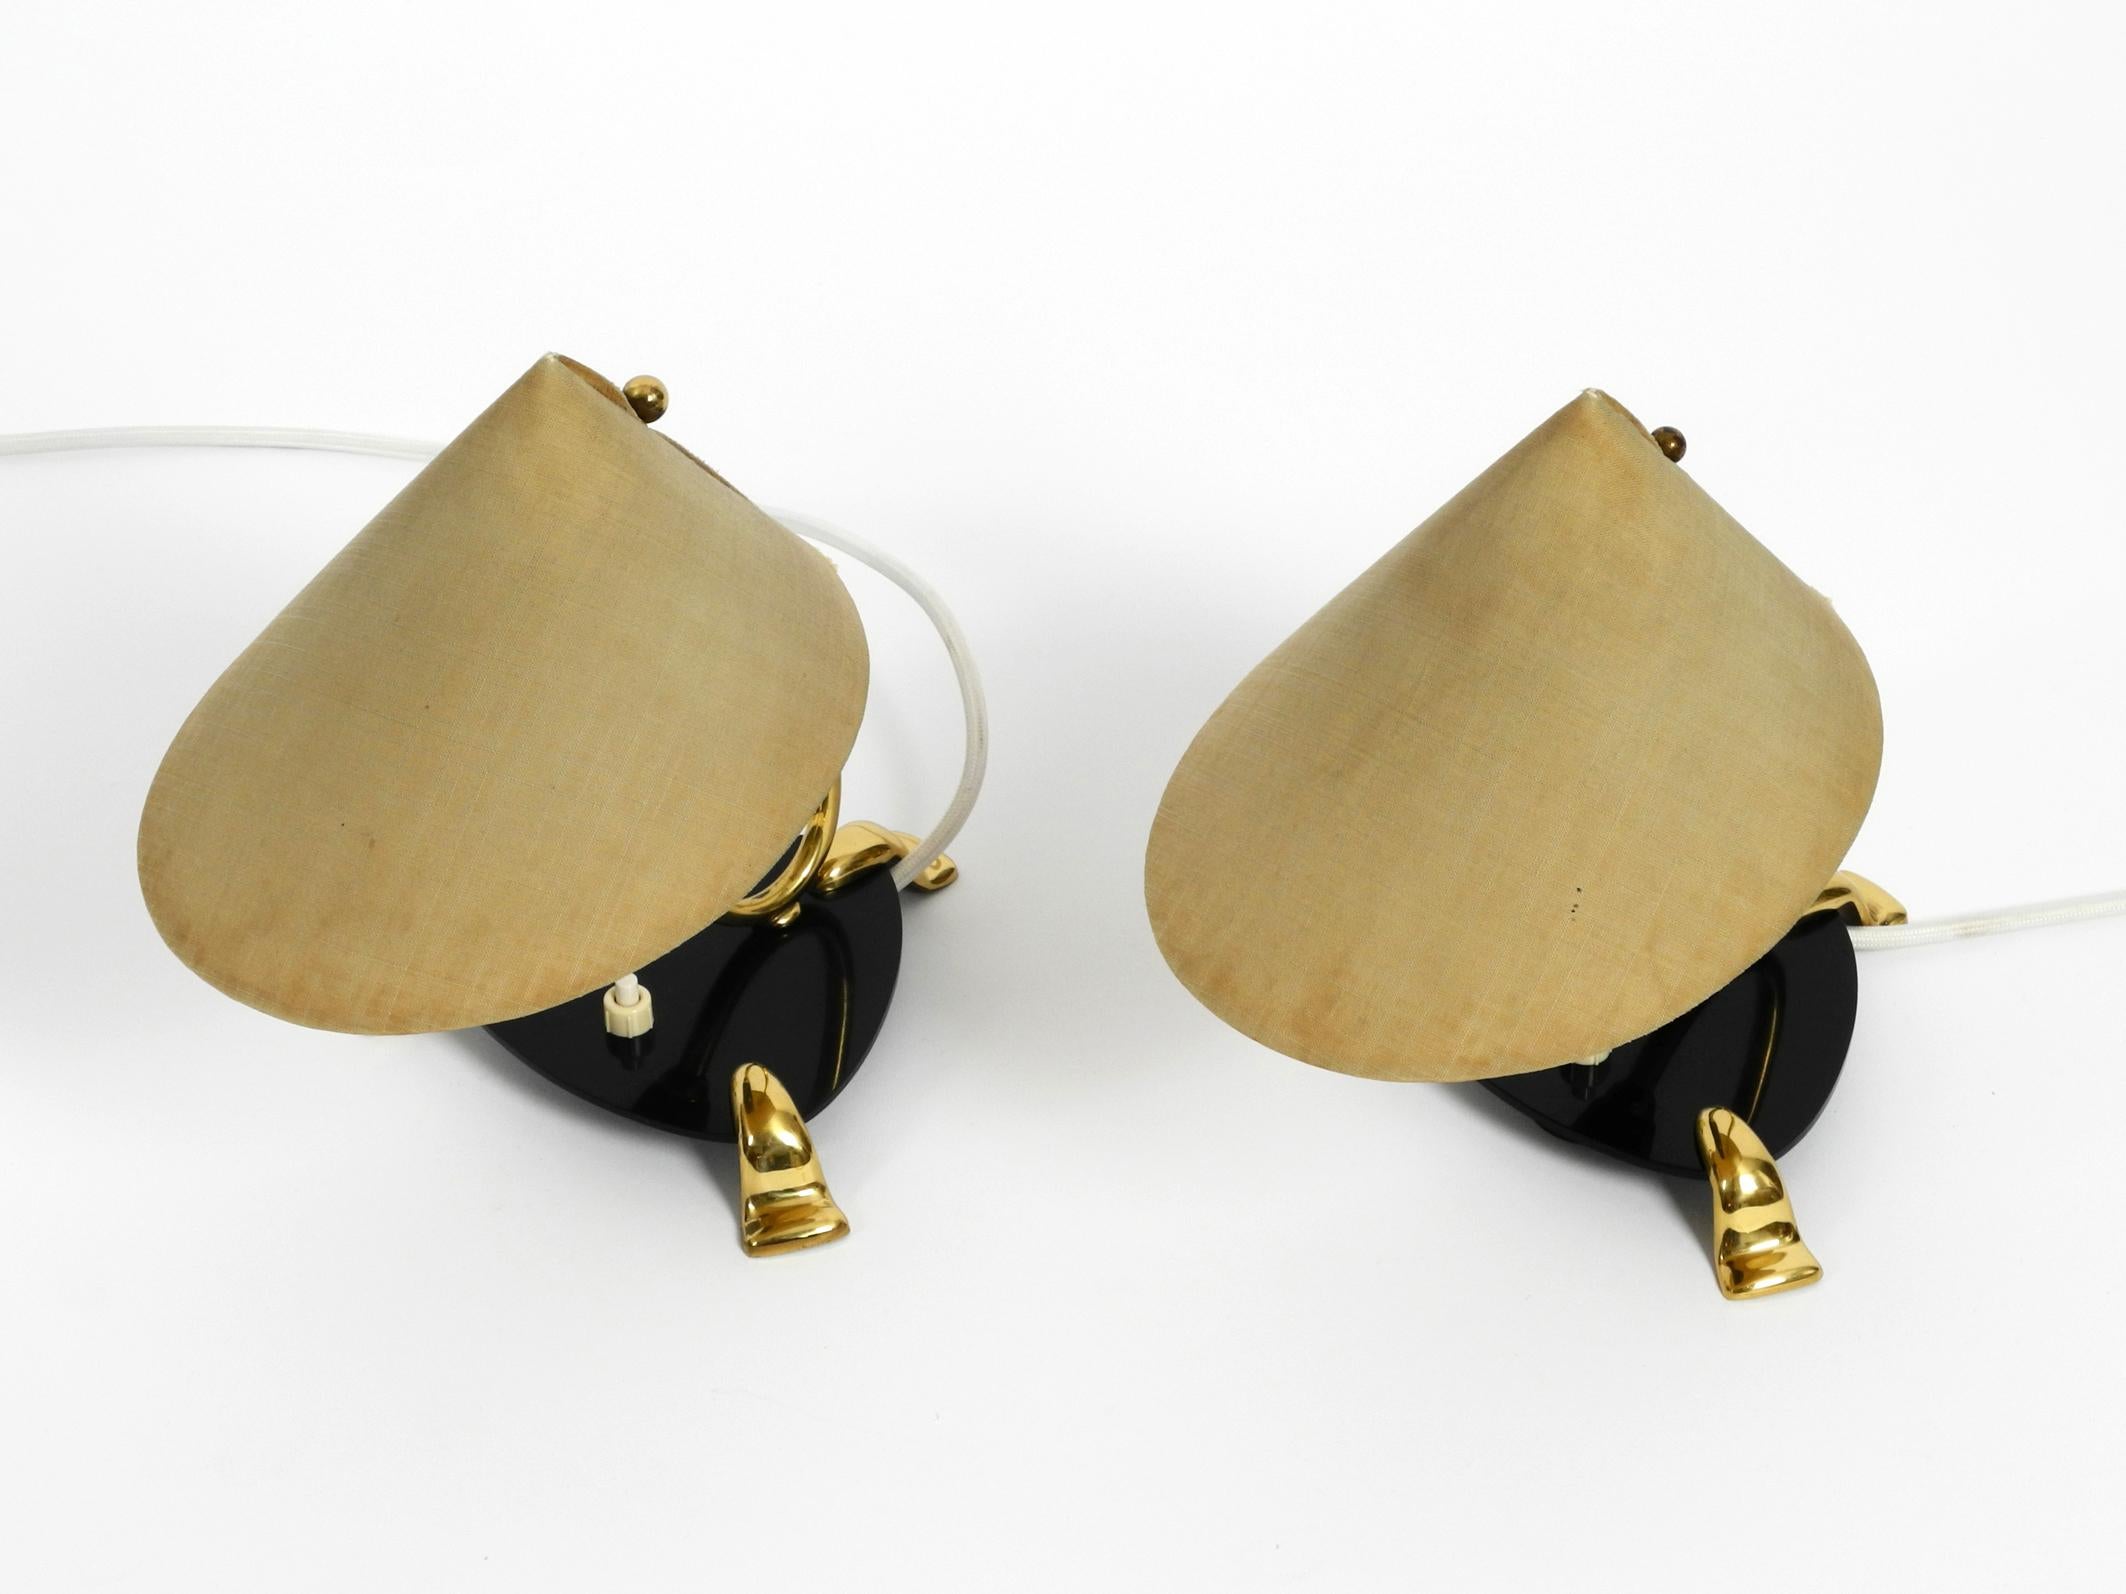 German Pair of Midcentury Bedside Lamps Made of Brass and Plexiglass with Fabric Shades